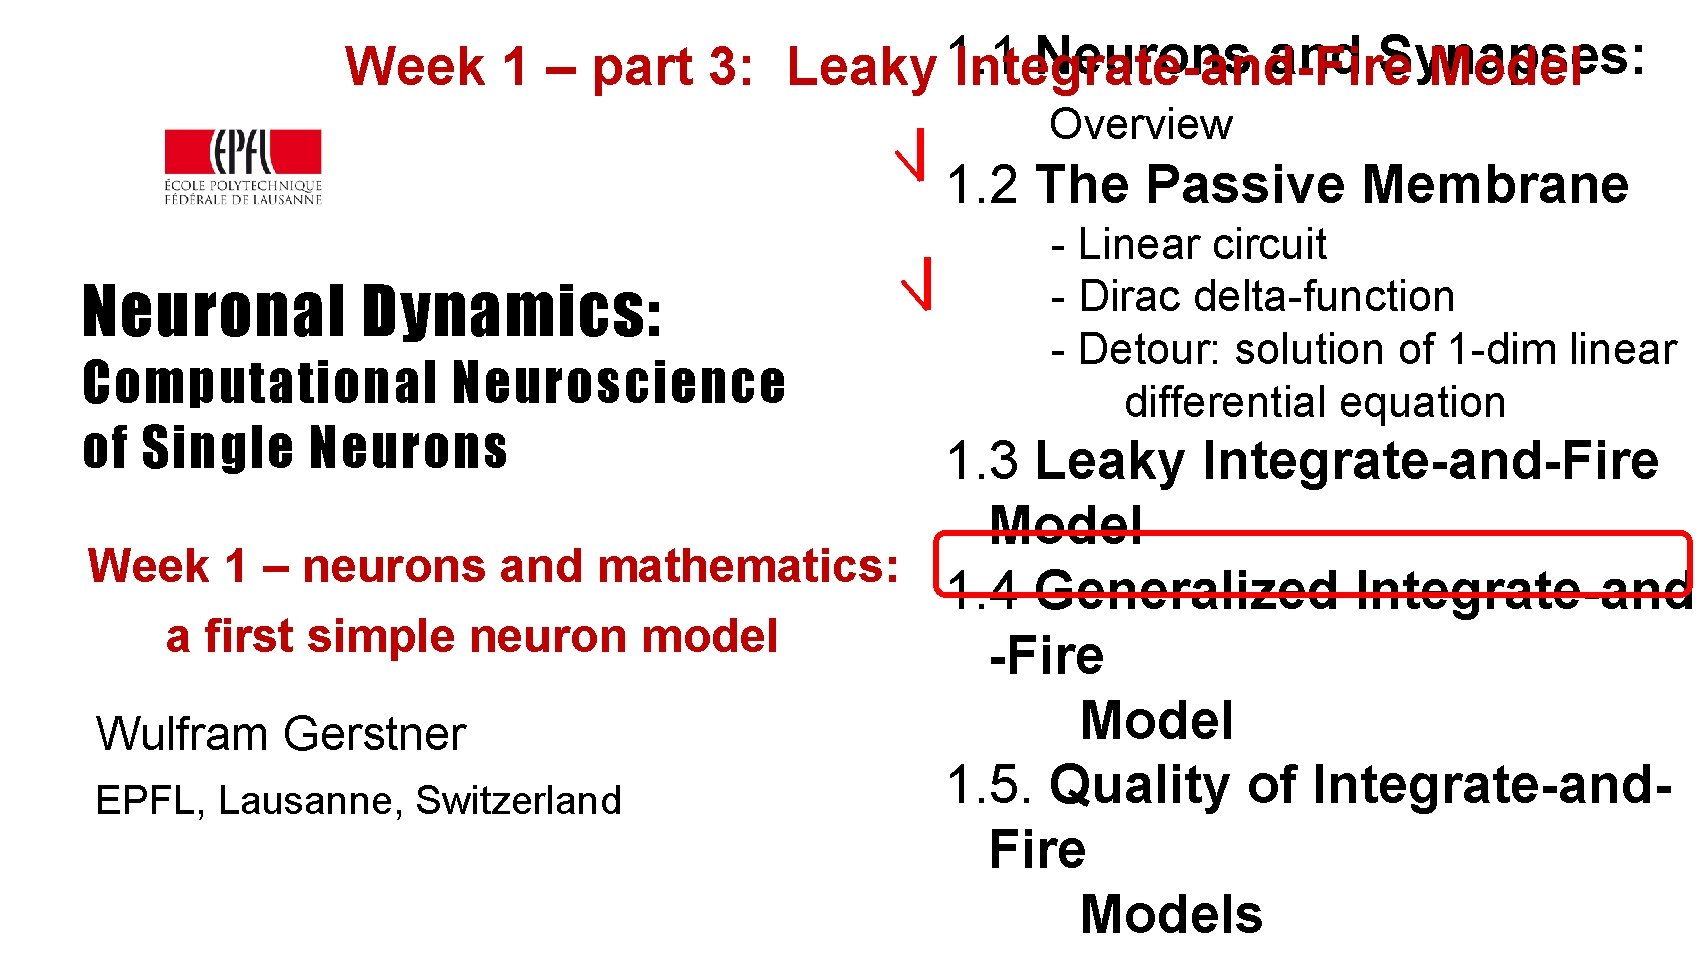 Neurons and Synapses: Week 1 – part 3: Leaky 1. 1 Integrate-and-Fire Model Overview